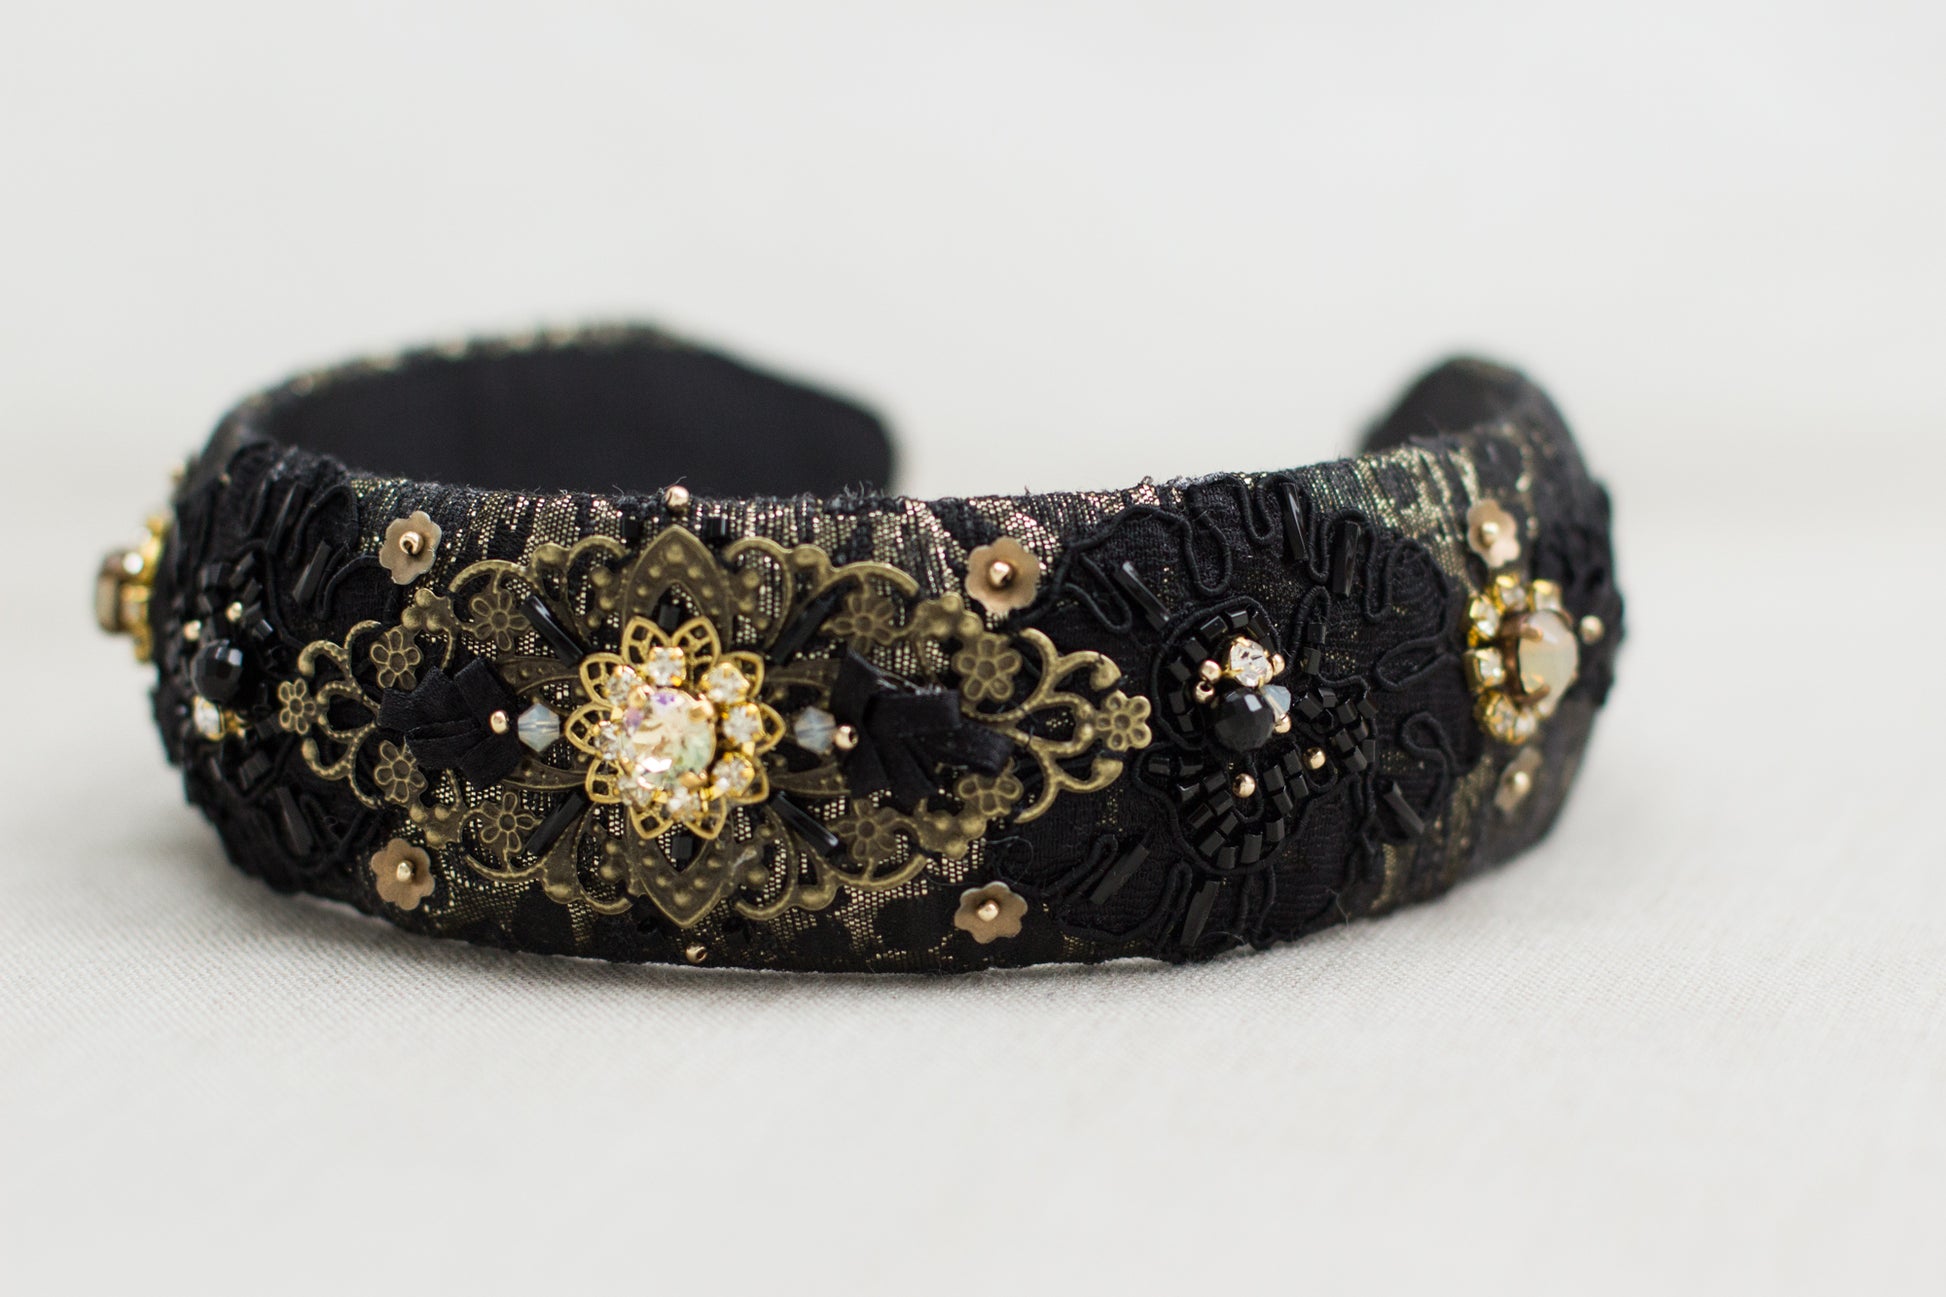 Wide Black Gold embroidered headband. Premium accessories. Excellent gift. A versatile accessory that is a must-have in every wardrobe. Handmade hair accessories. OOAK accessories. Lace headpiece. Gift idea. Fashion accessories. Fascinator